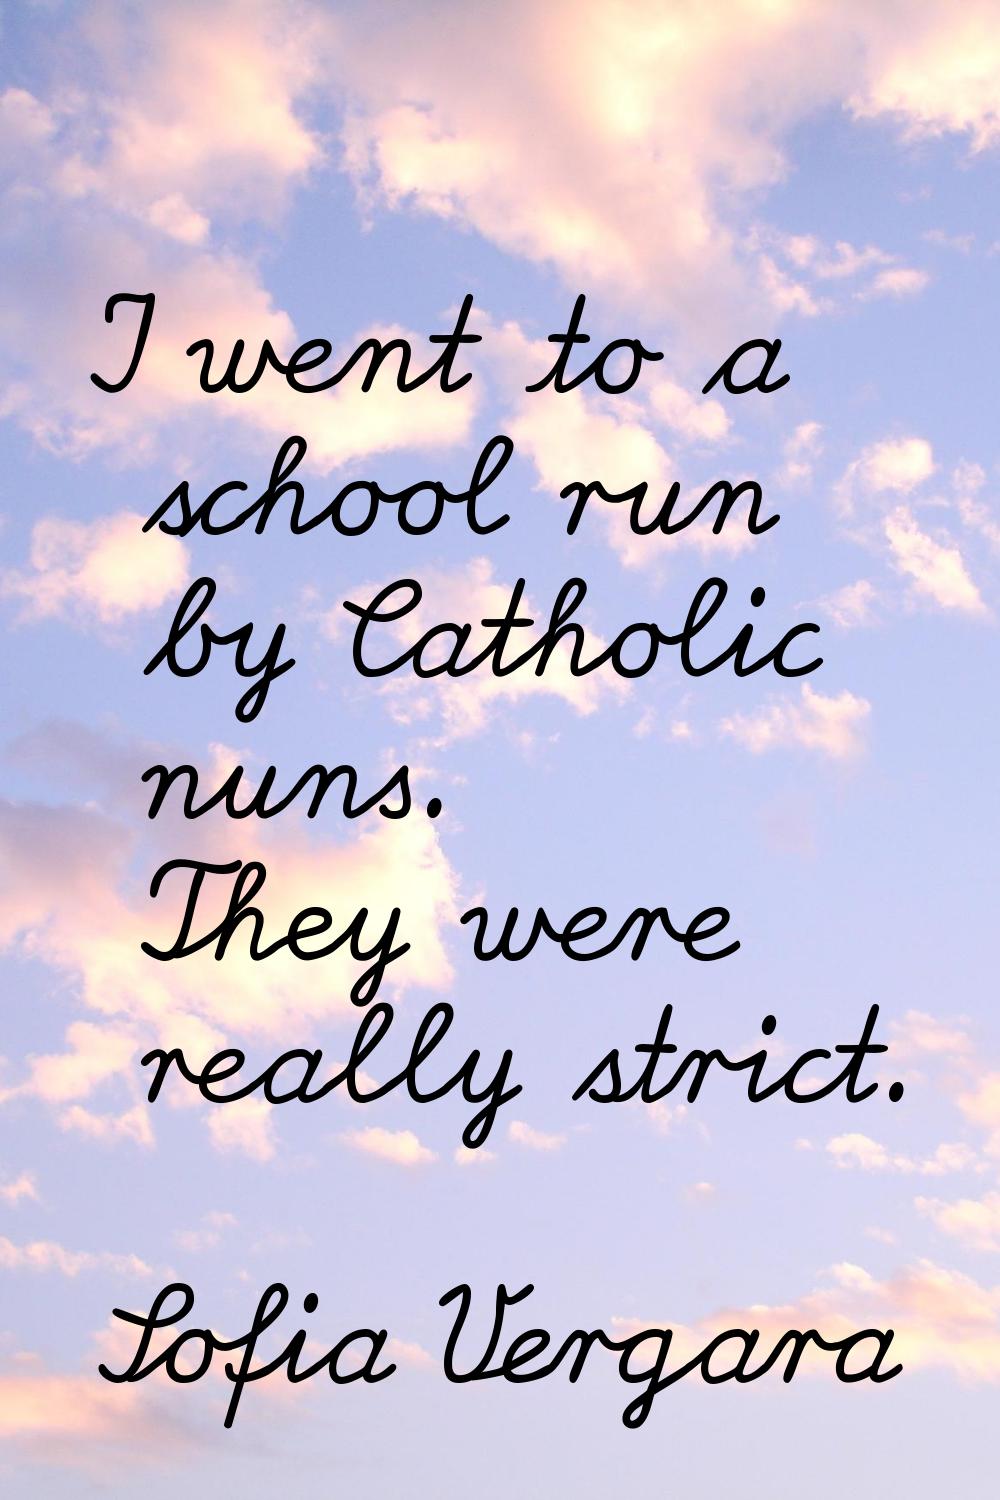 I went to a school run by Catholic nuns. They were really strict.